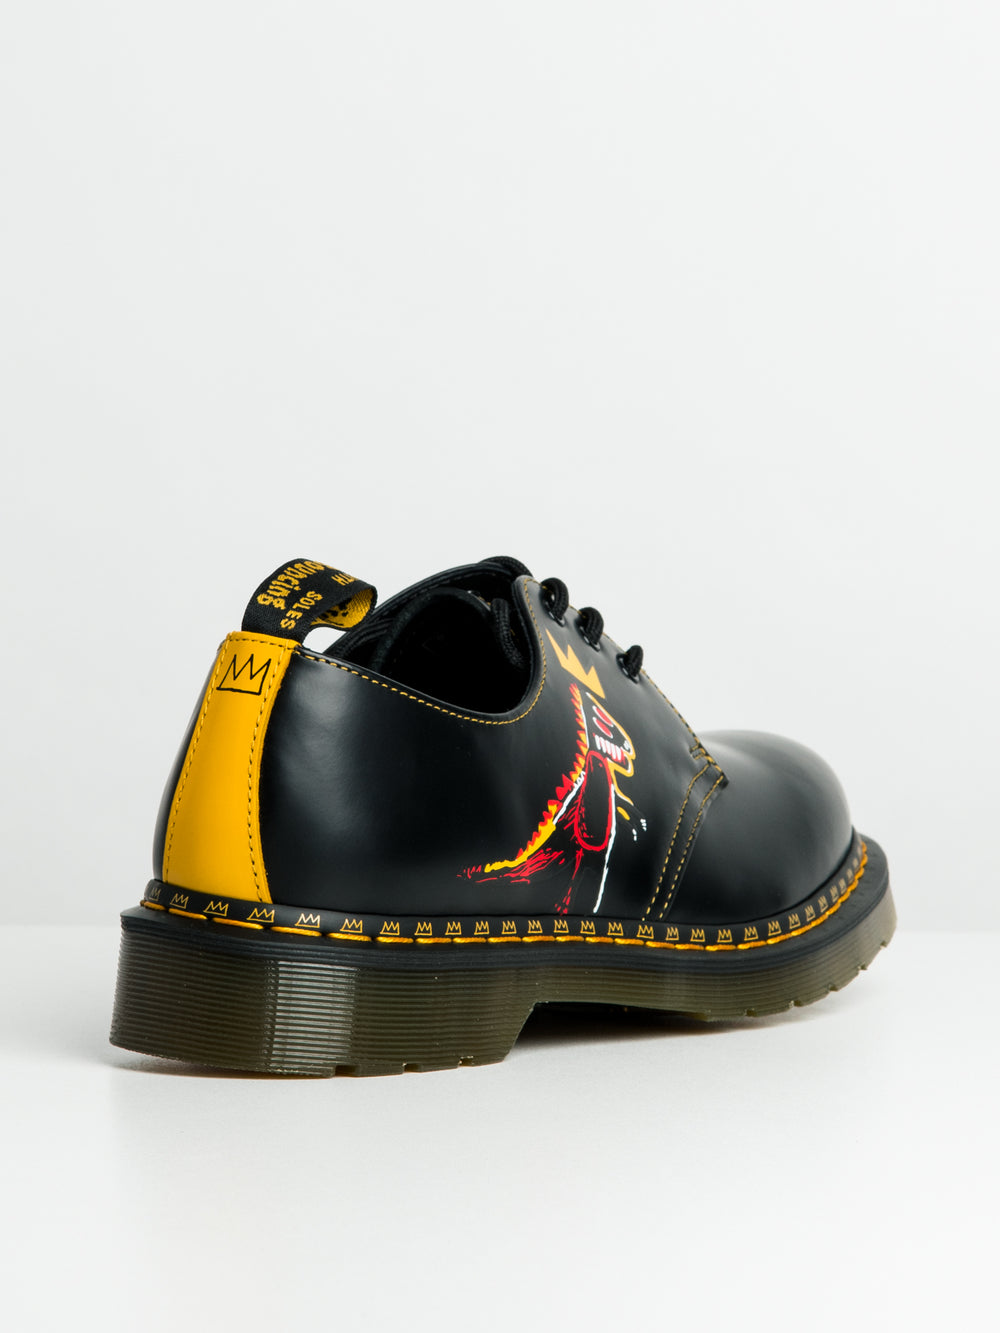 WOMENS DR MARTENS 1461 BASQUIAT SMOOTH BOOT - CLEARANCE